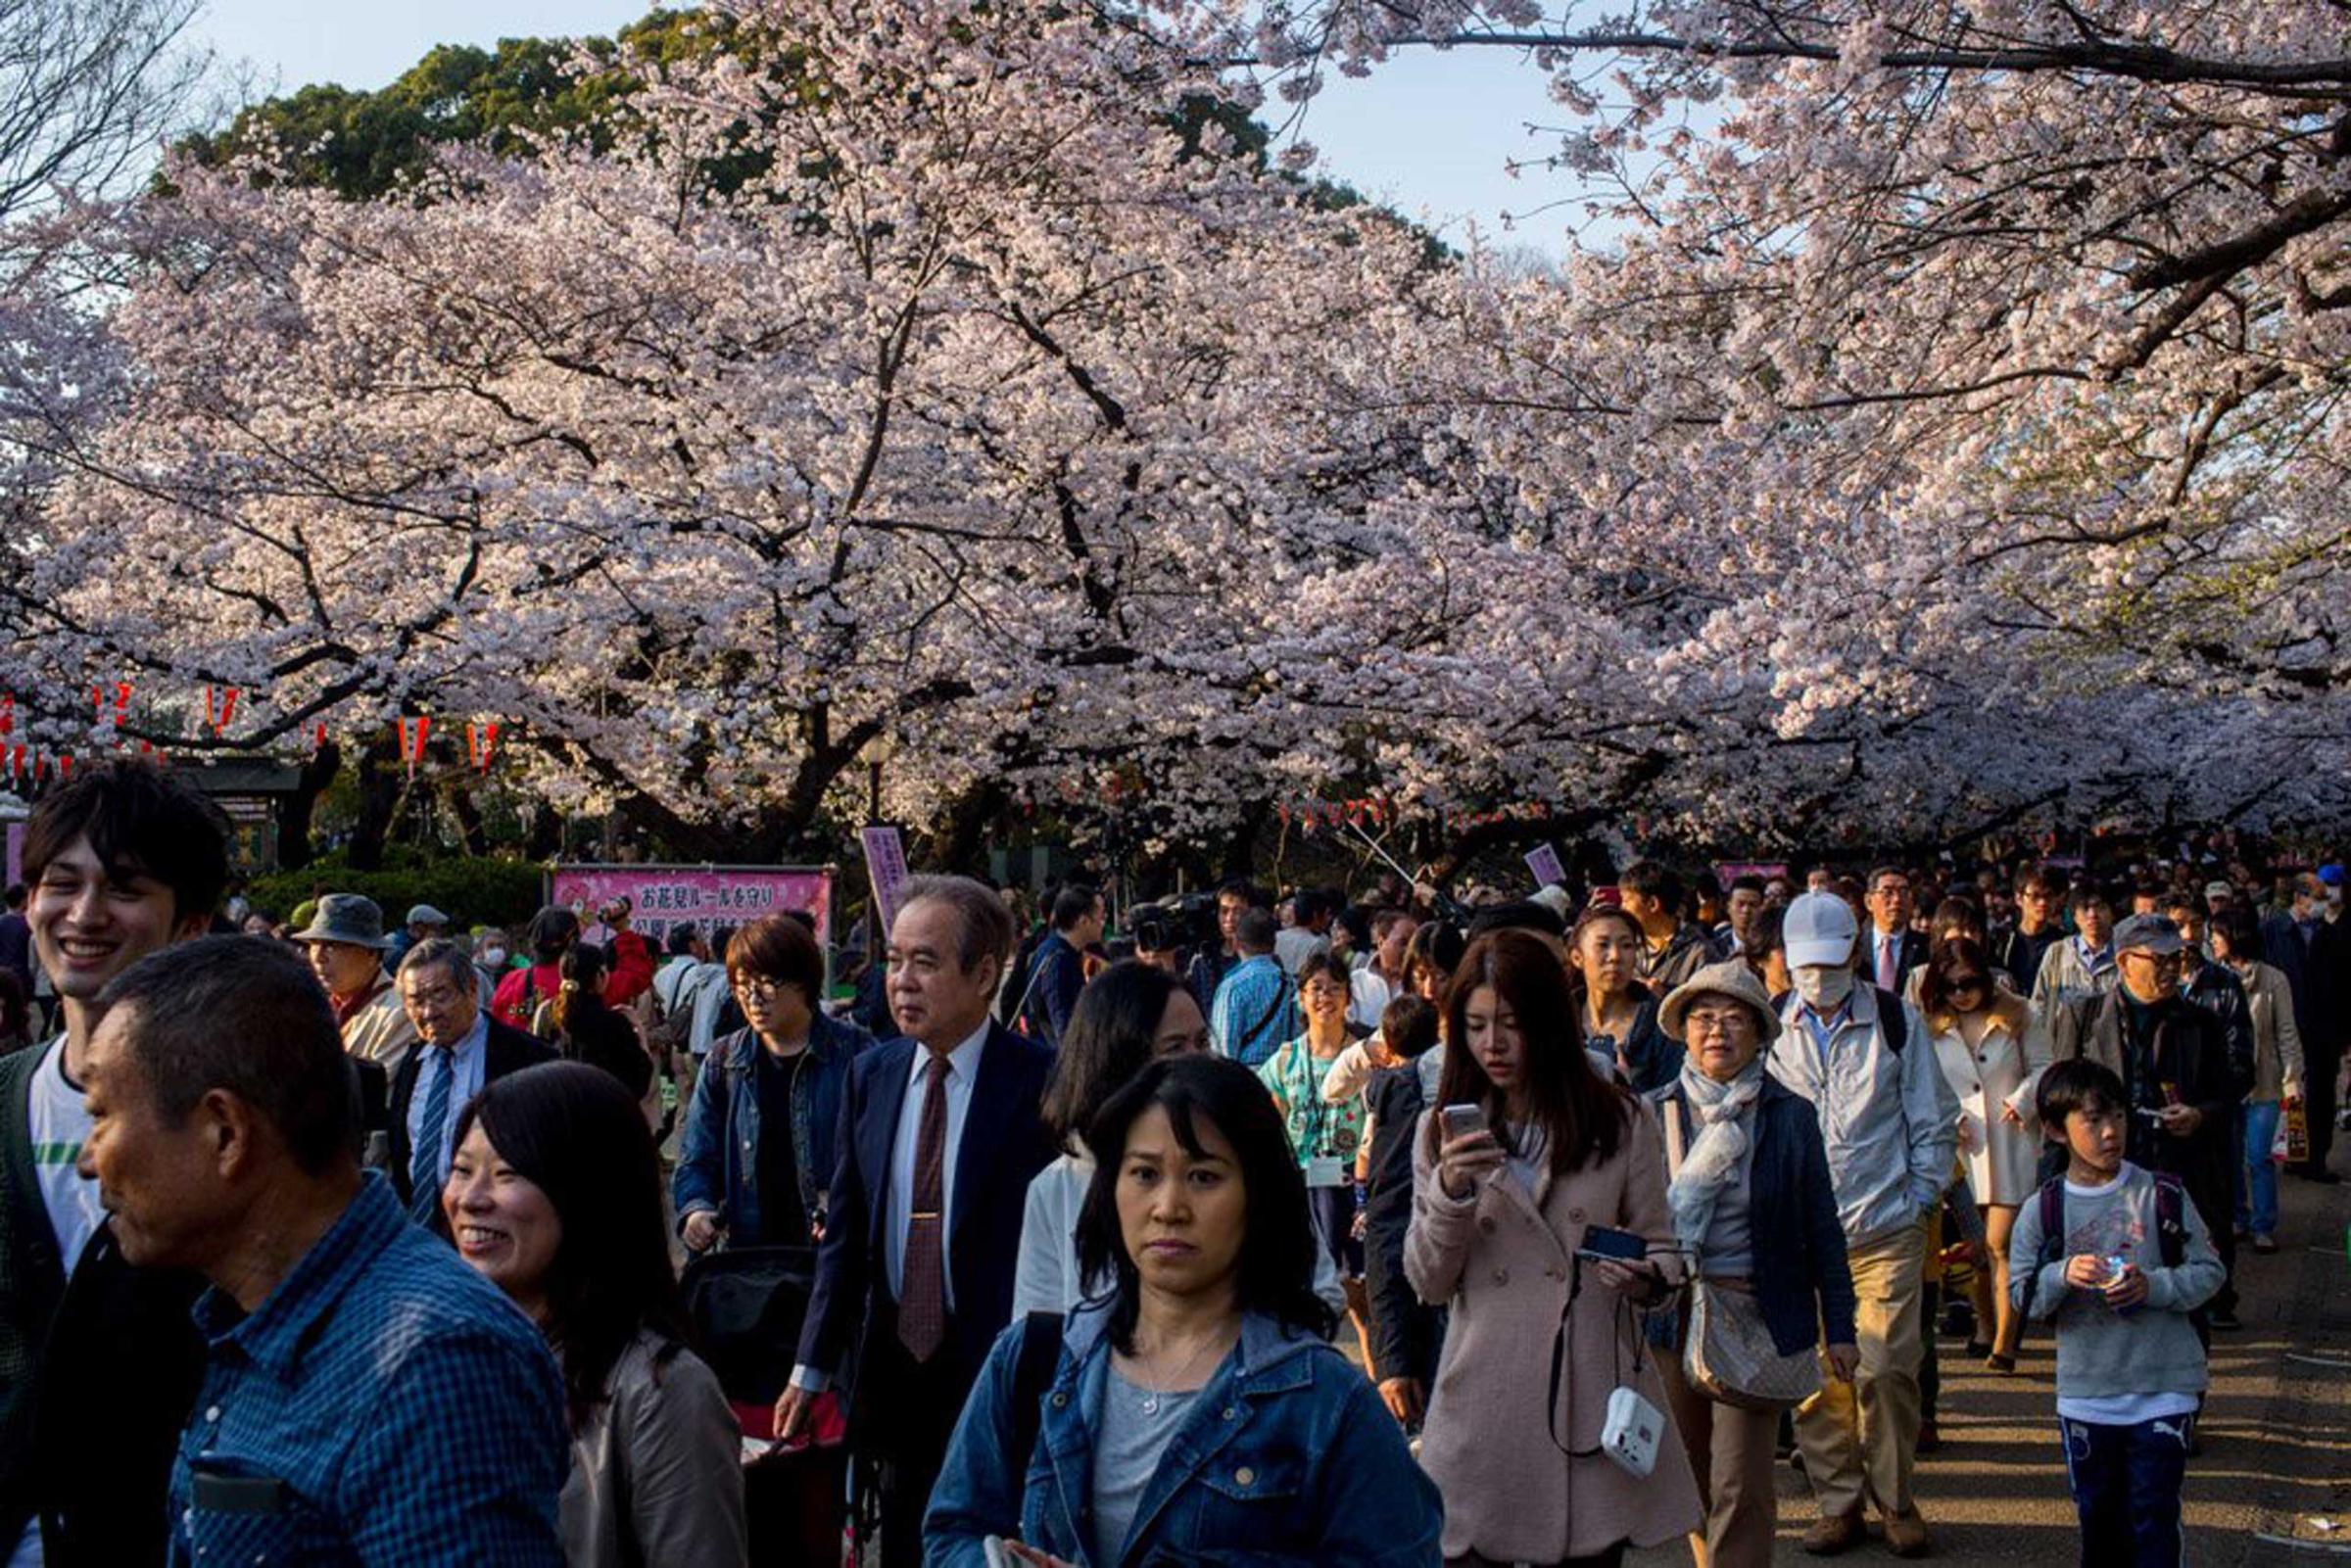 People walk under blooming cherry blossom trees in Ueno Park in Tokyo on March 30, 2015.